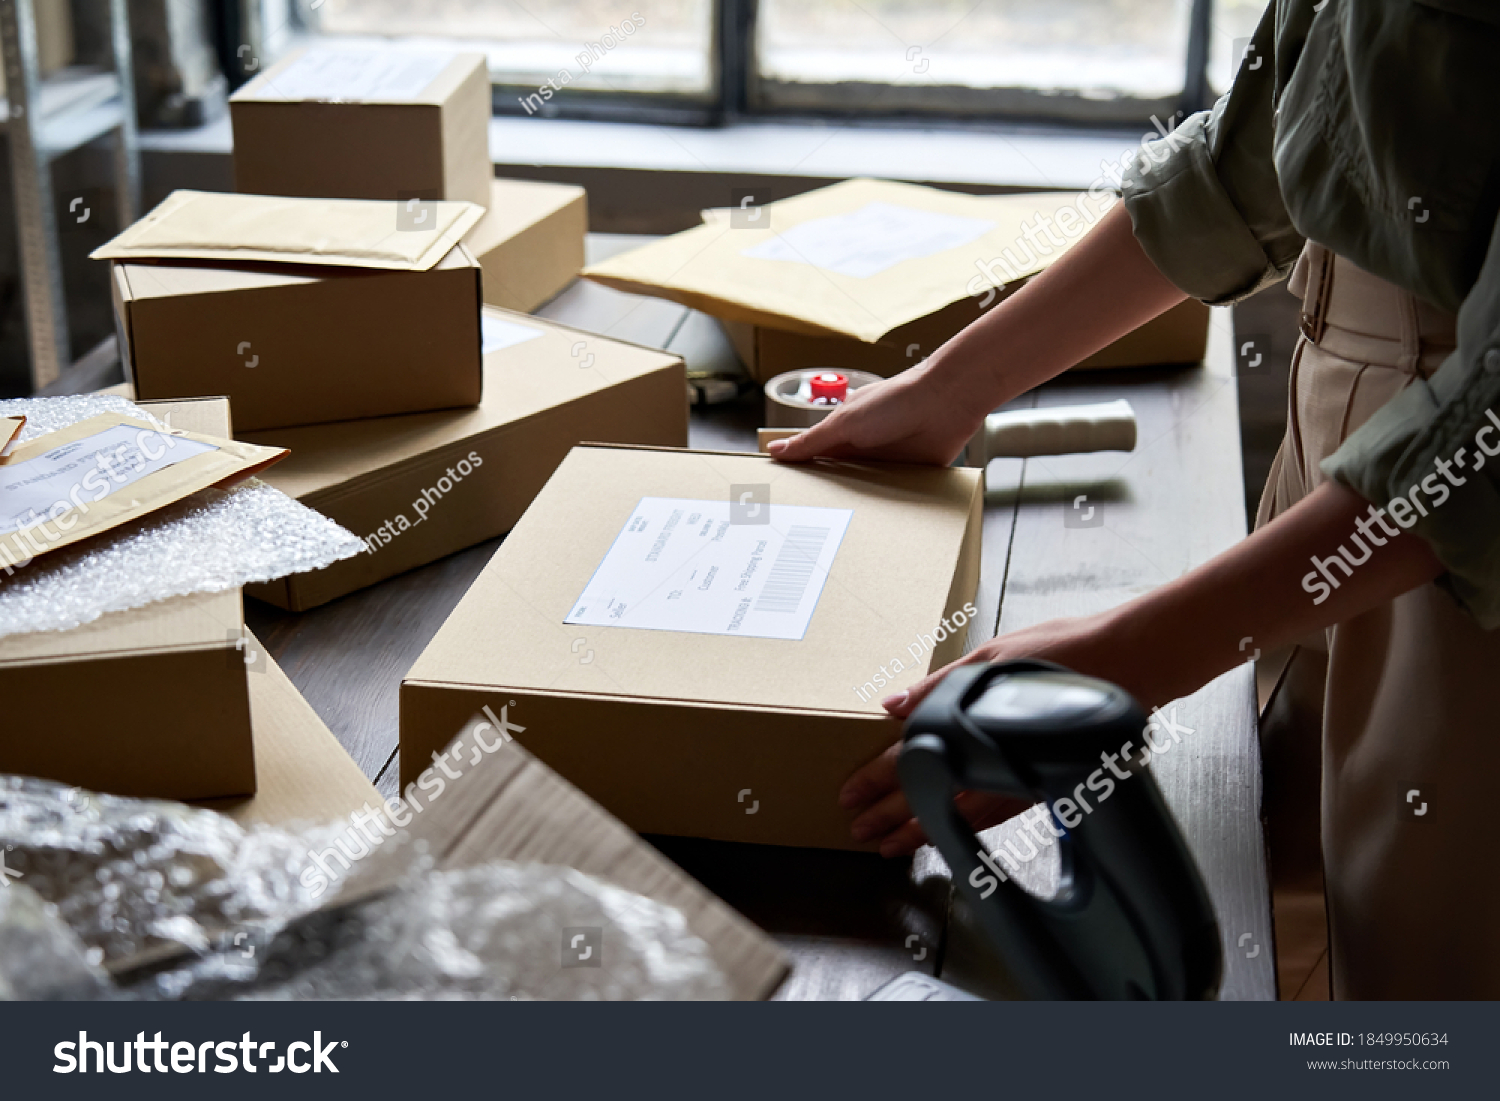 Female distribution warehouse worker or seller packing ecommerce shipping order box for dispatching, preparing post courier delivery package, dropshipping commerce retail shipment service concept. #1849950634